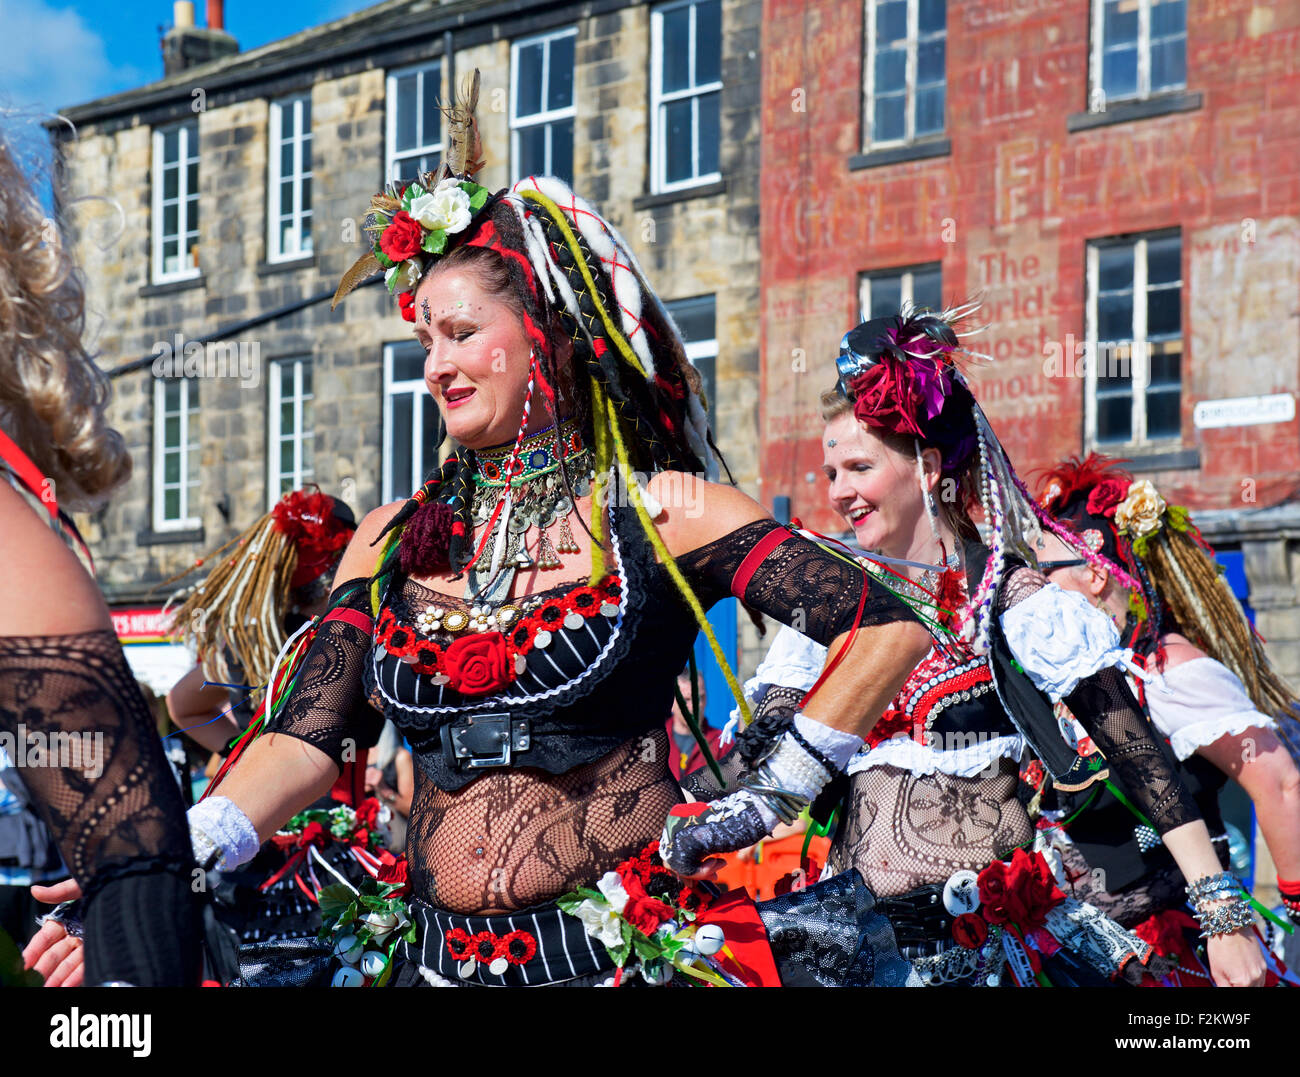 Belly Dancers (the 400 Roses troupe), at the Otley Folk festival, West Yorkshire, England UK Stock Photo